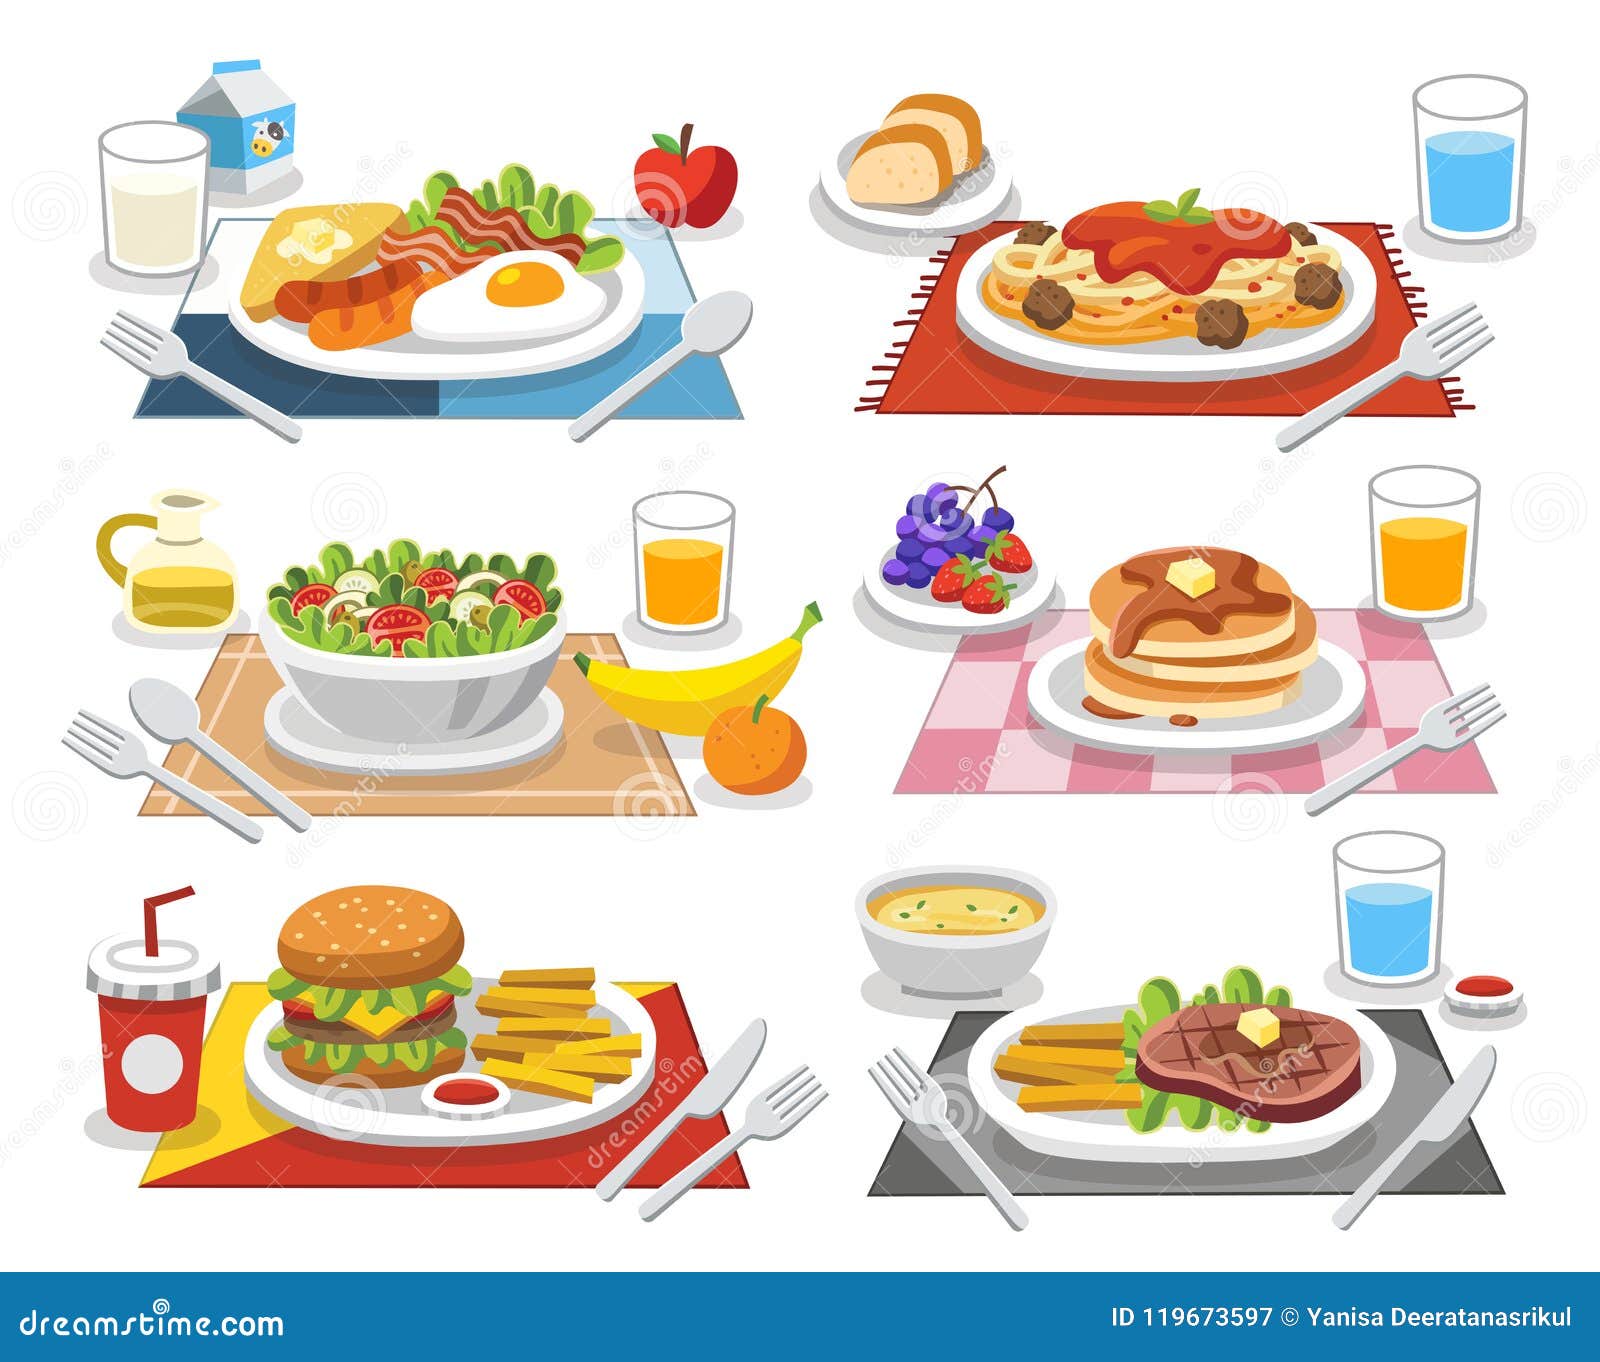 sample food at each meal. meals of people who should eat.